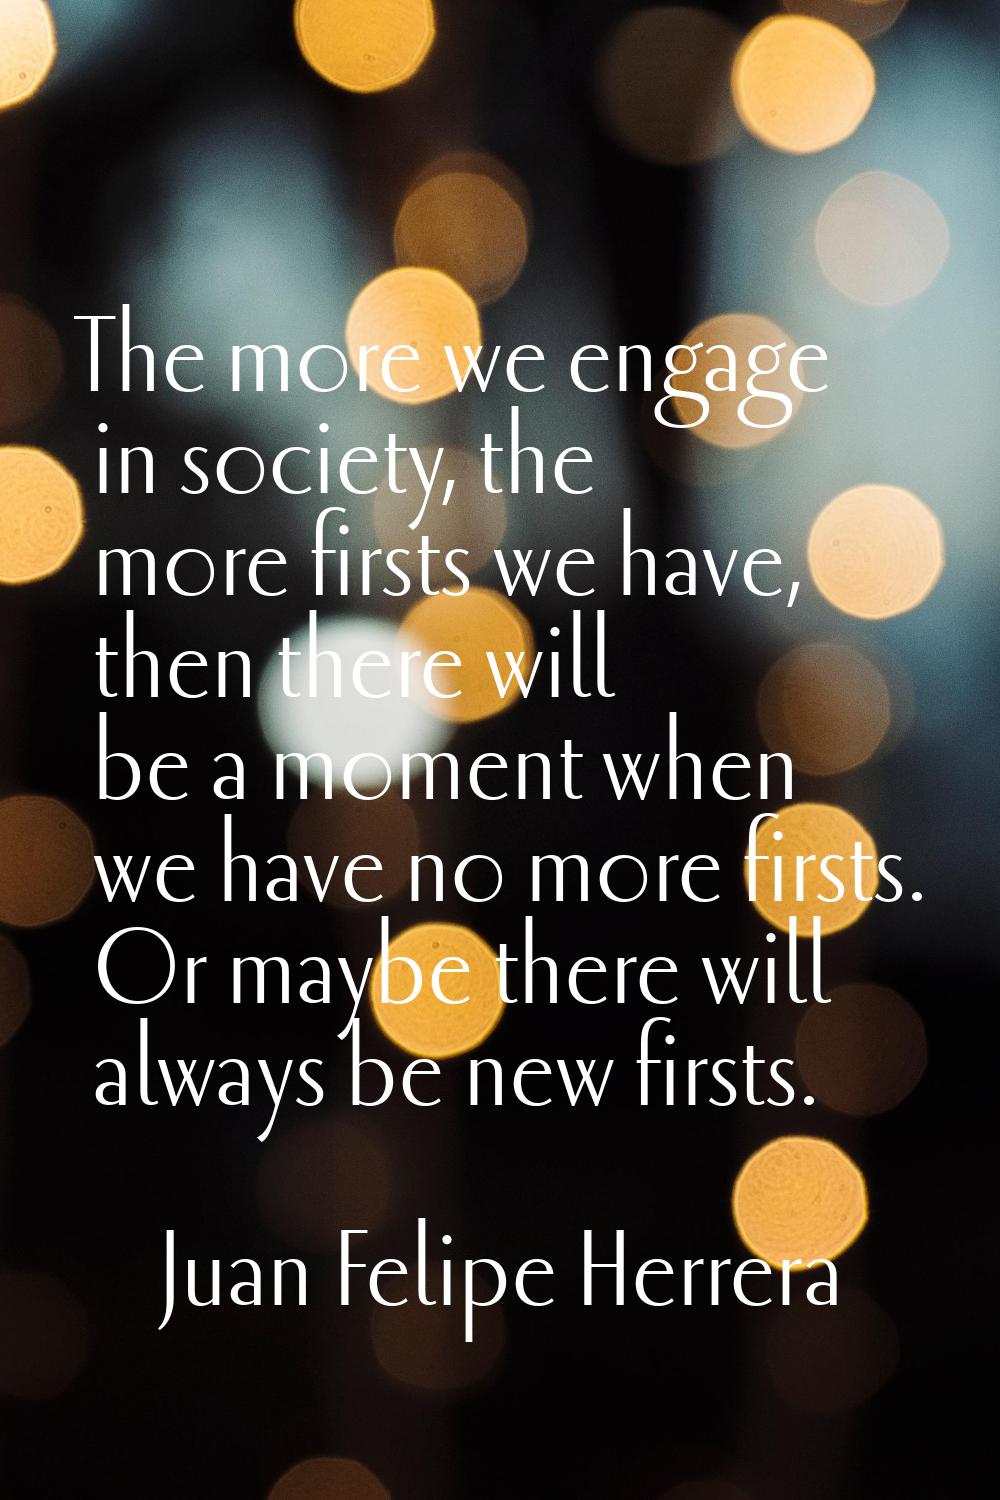 The more we engage in society, the more firsts we have, then there will be a moment when we have no